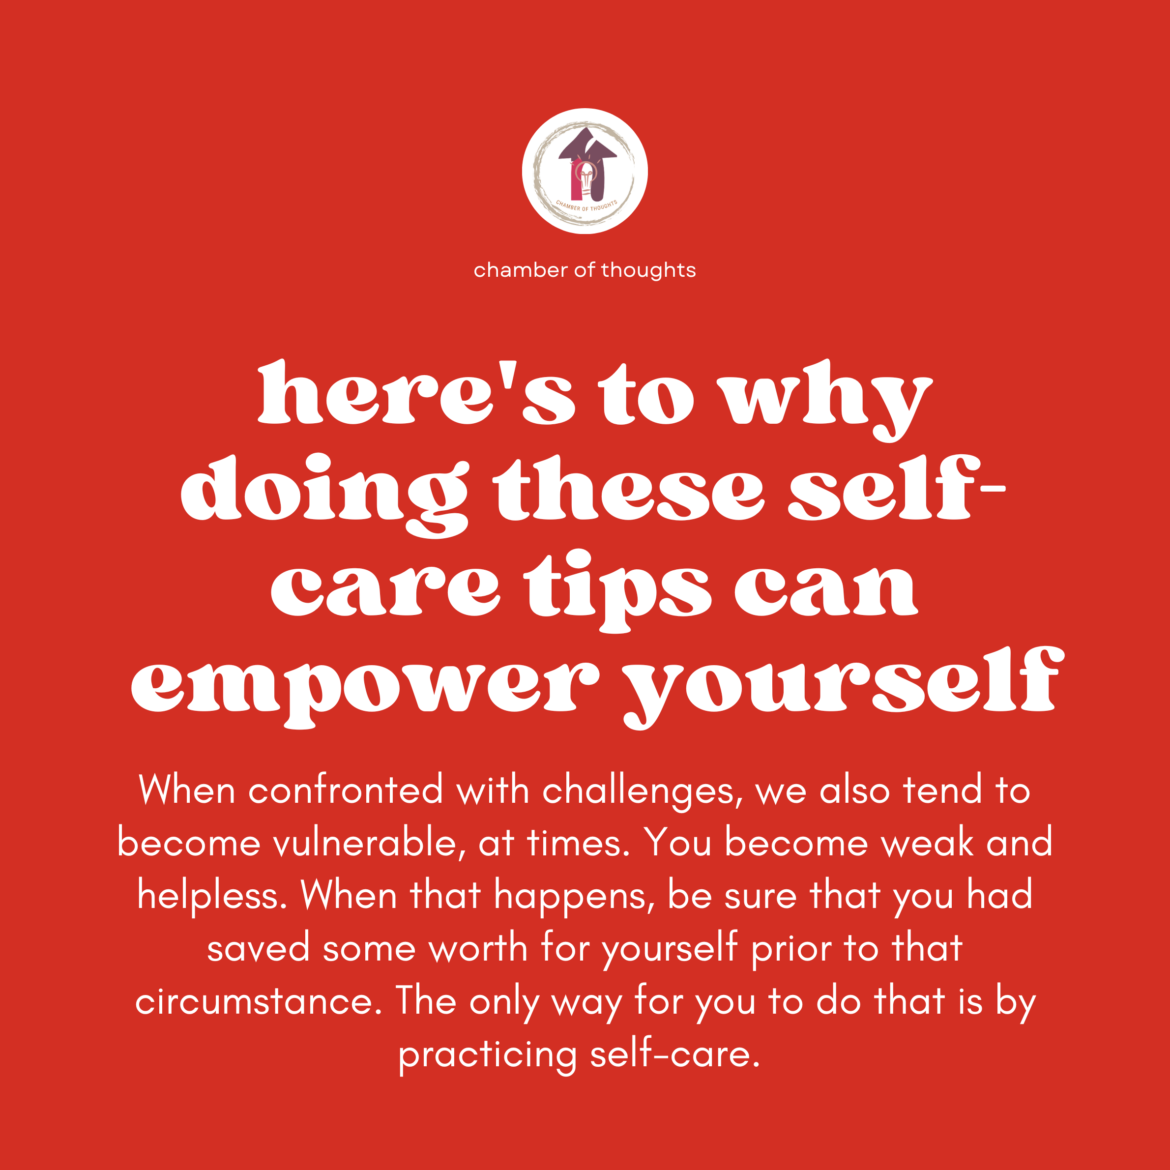 Here’s to Why Doing these Self-care Tips Can Empower Yourself